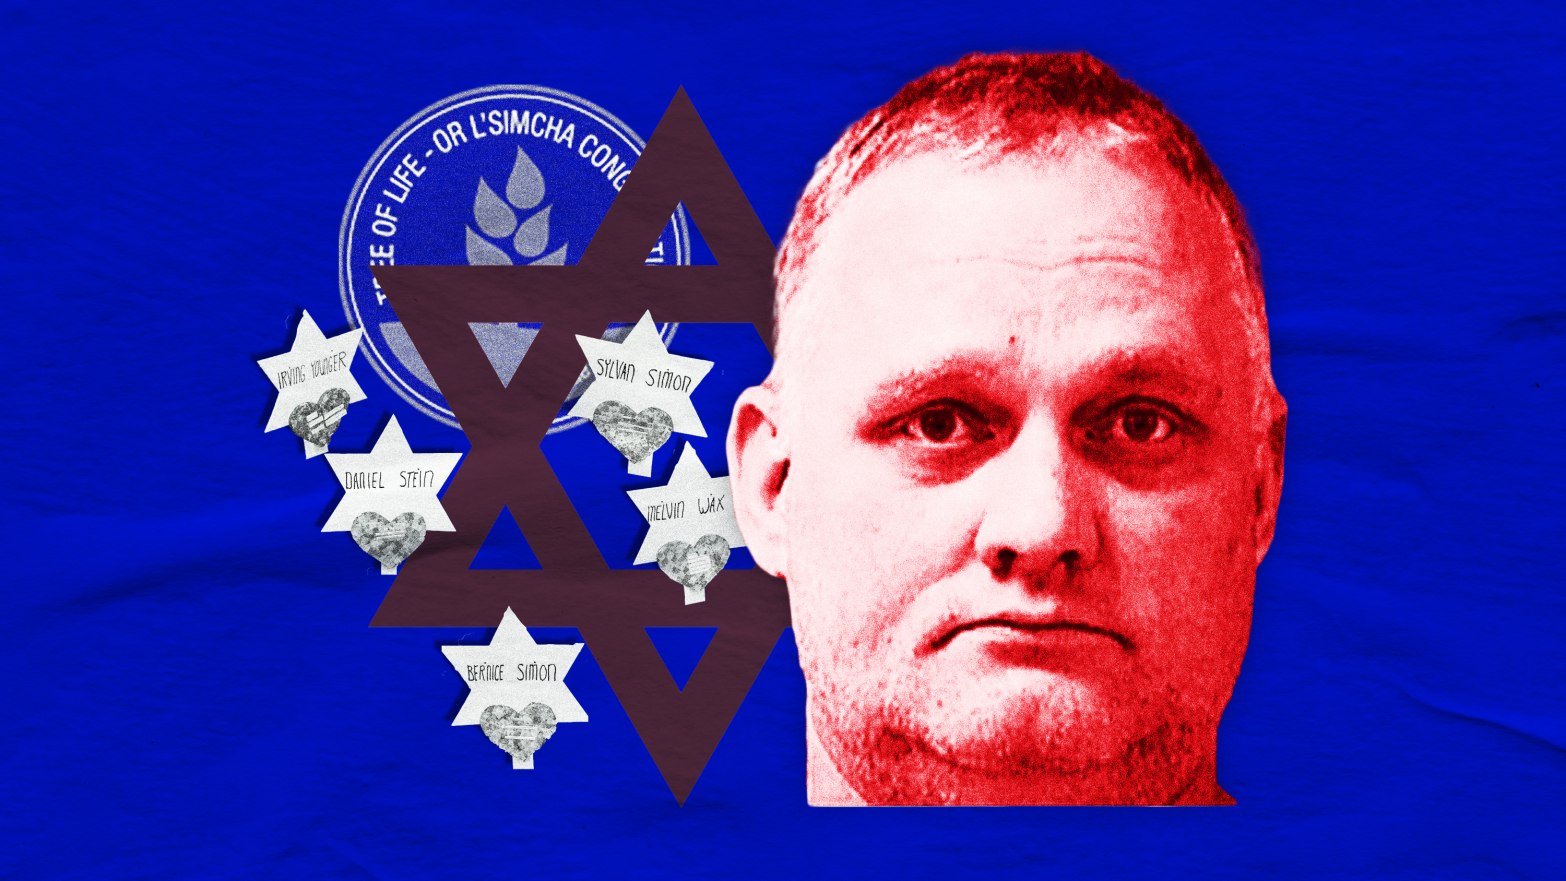 A photo composite of Tree of Life synagogue shooter Robert Bowers mugshot and Jewish Star of David and memorials for victims 